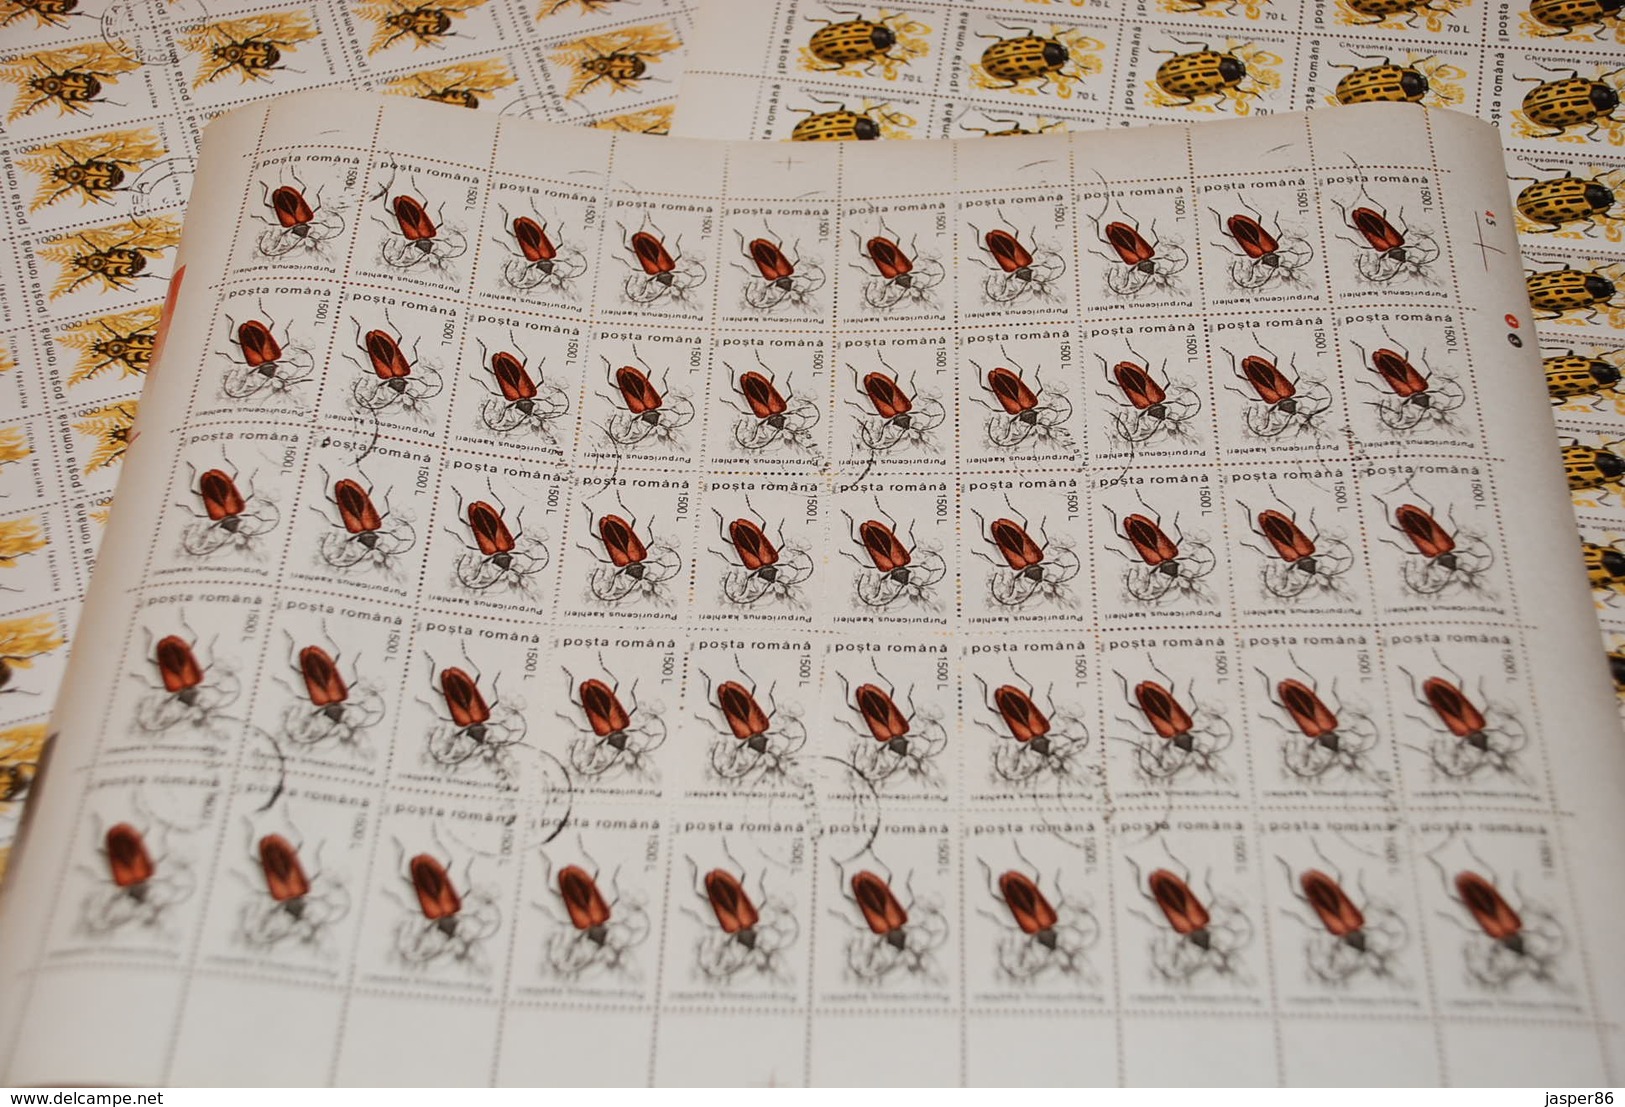 ROMANIA 500 Insects Sc 4082-4091, 50 x COMPLETE sets WHOLESALE CV$112.50